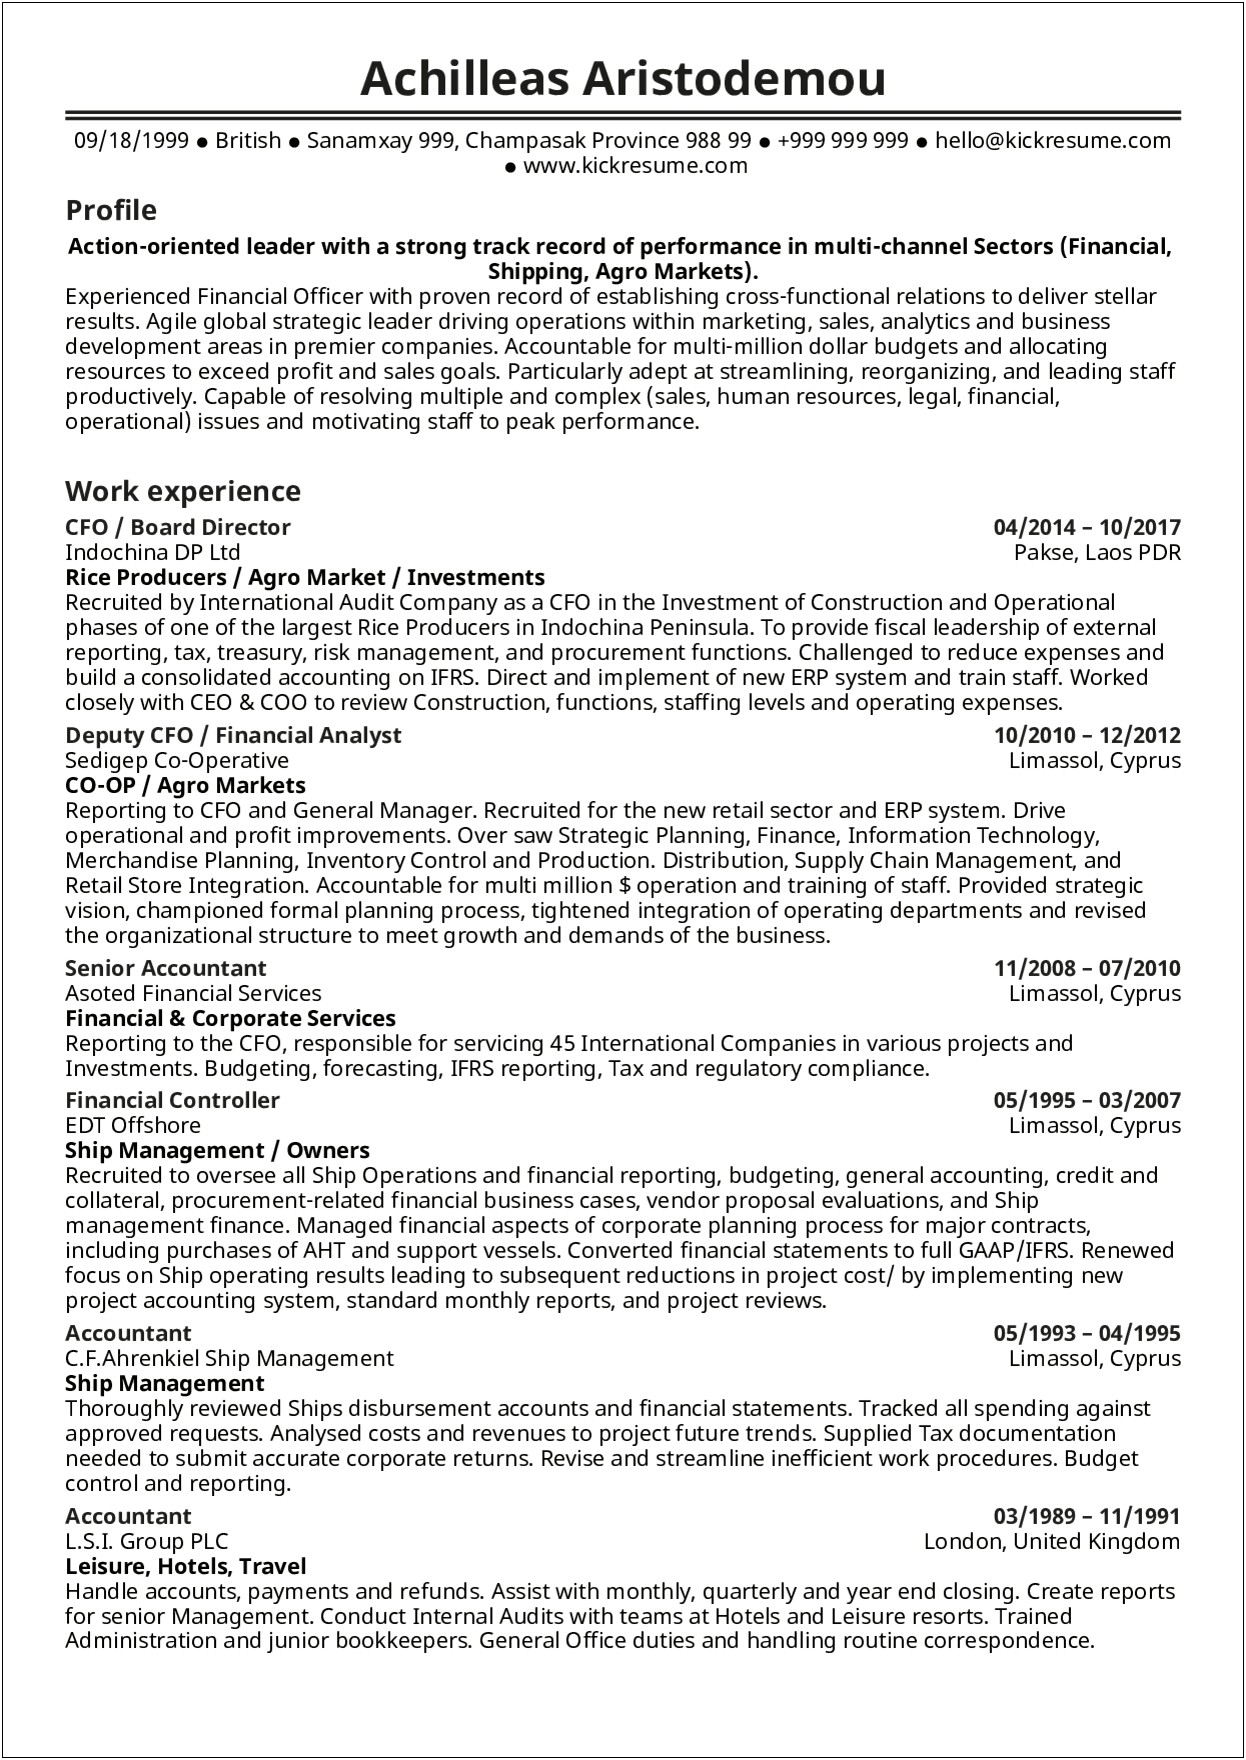 Resume Summary Examples For Banking